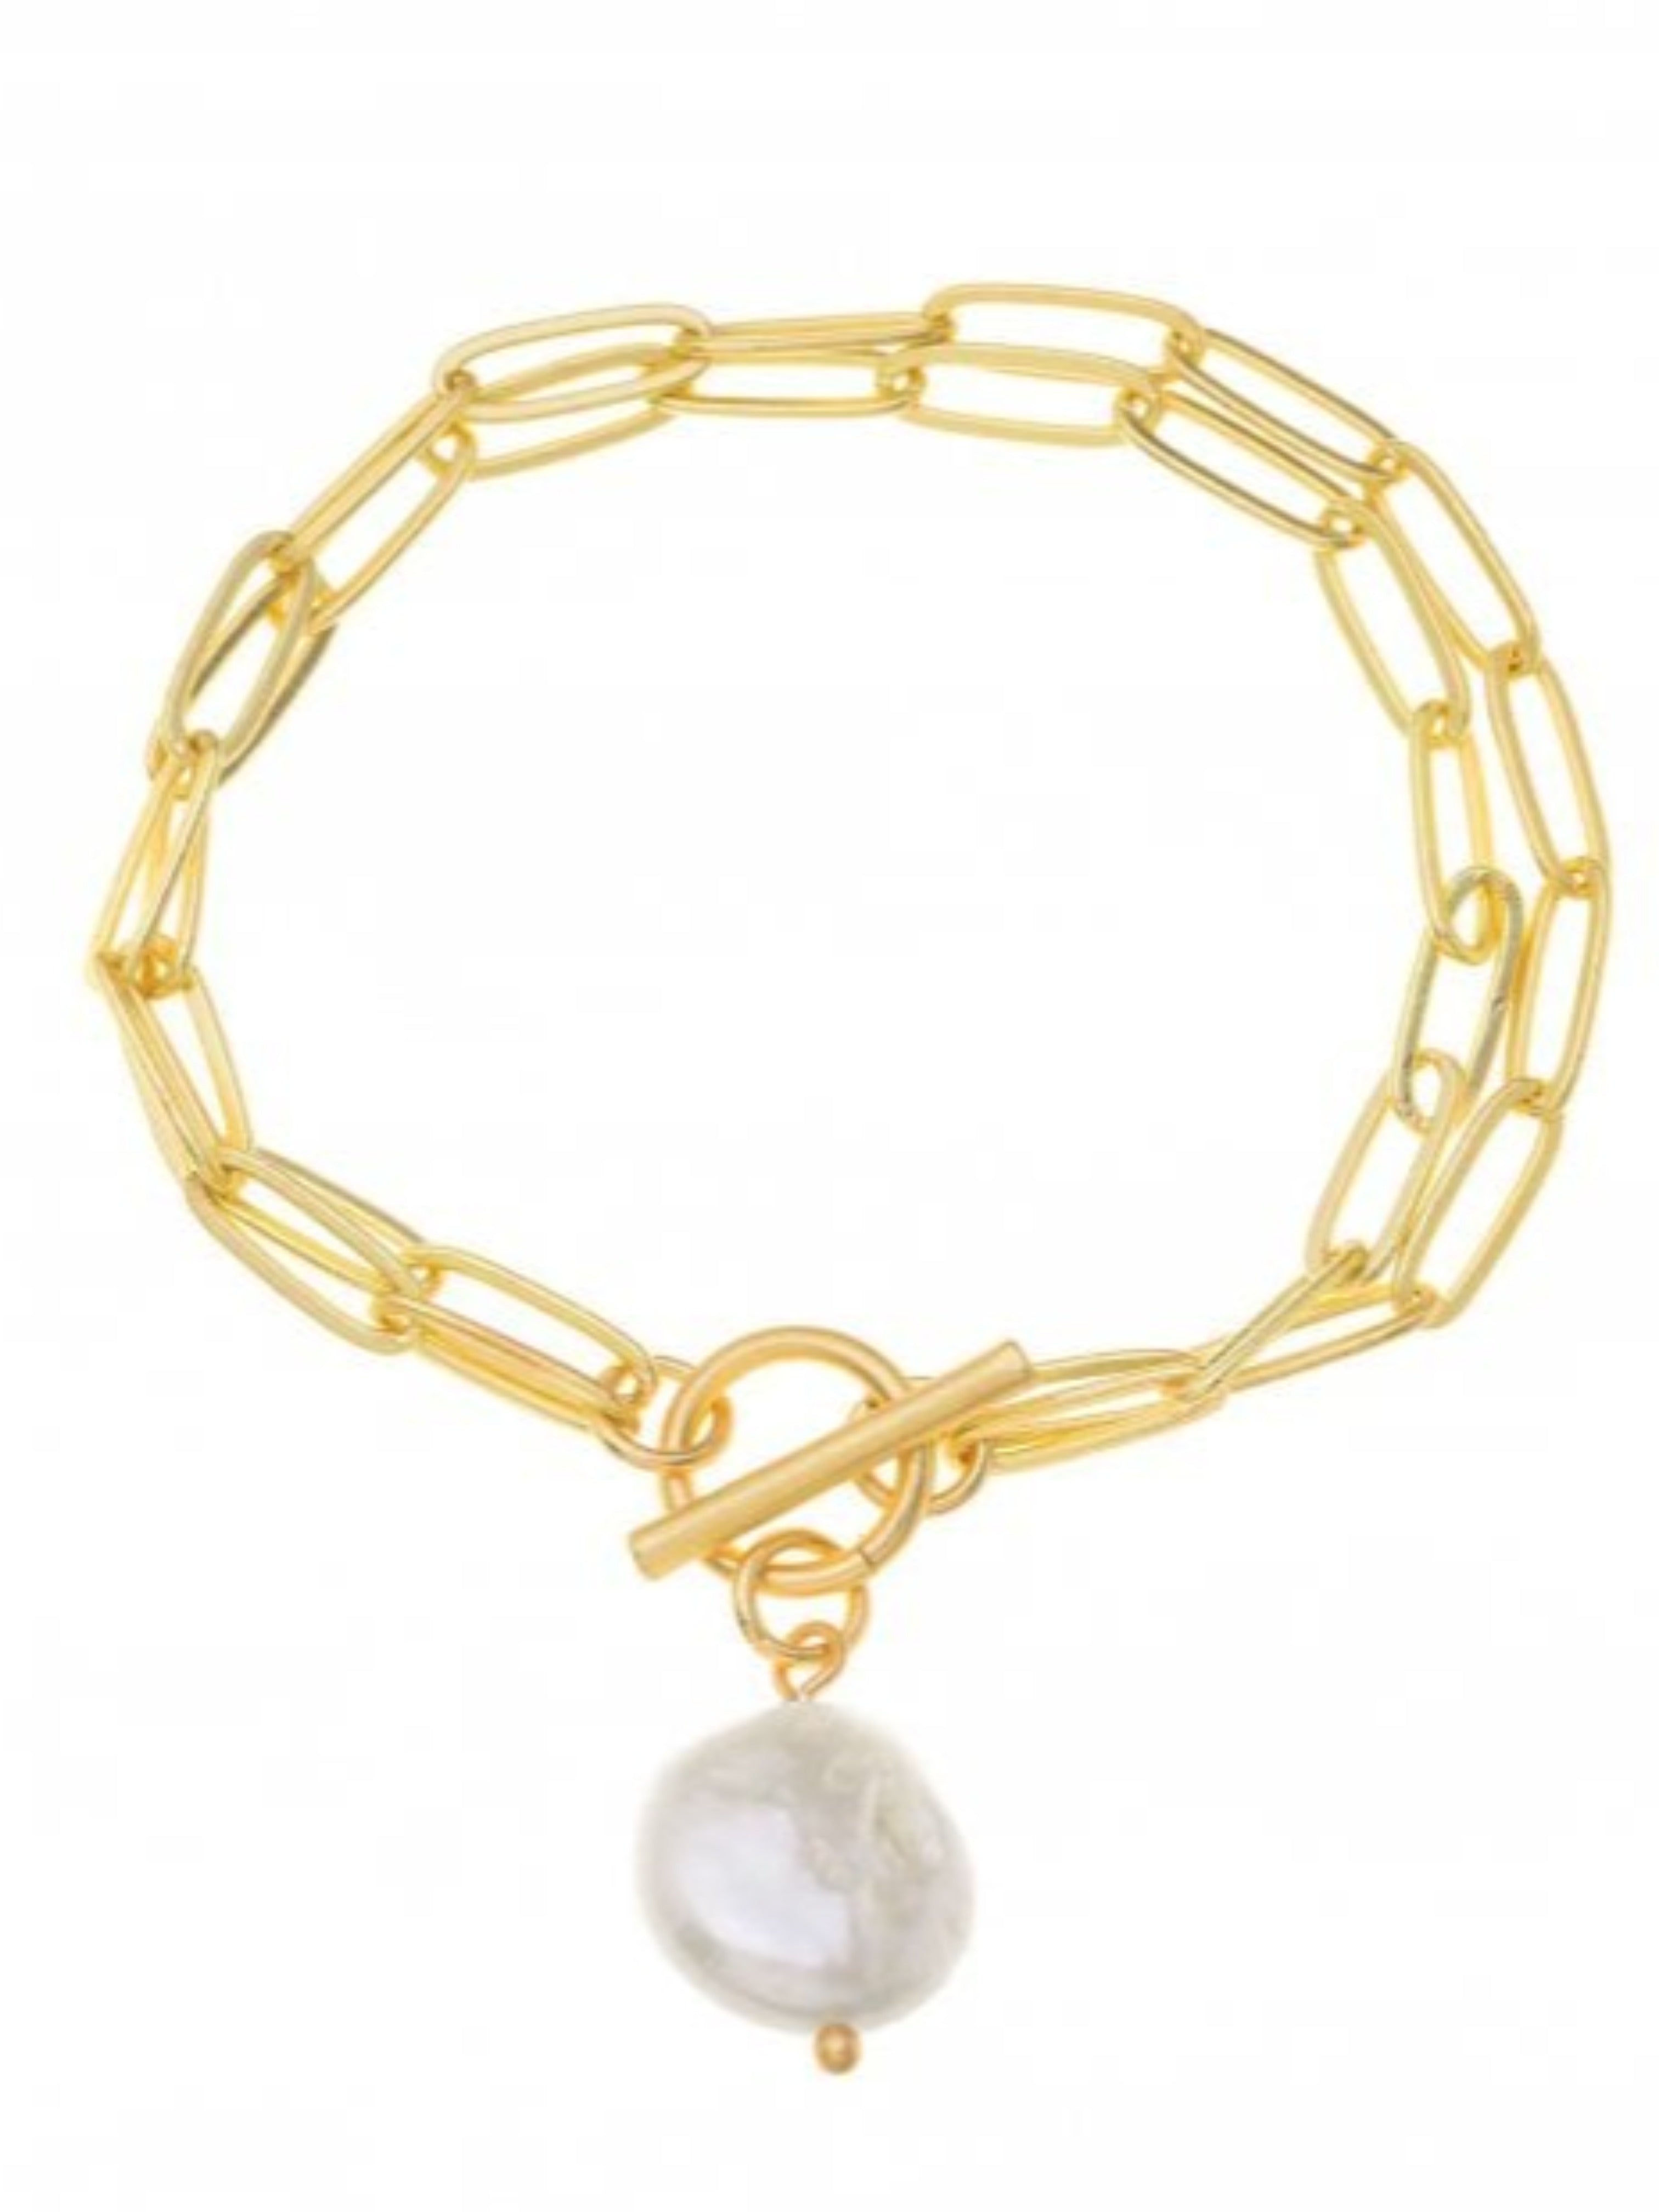 Gold Plated Thin Double Chain T-Bar Bracelet with Pearl with lock